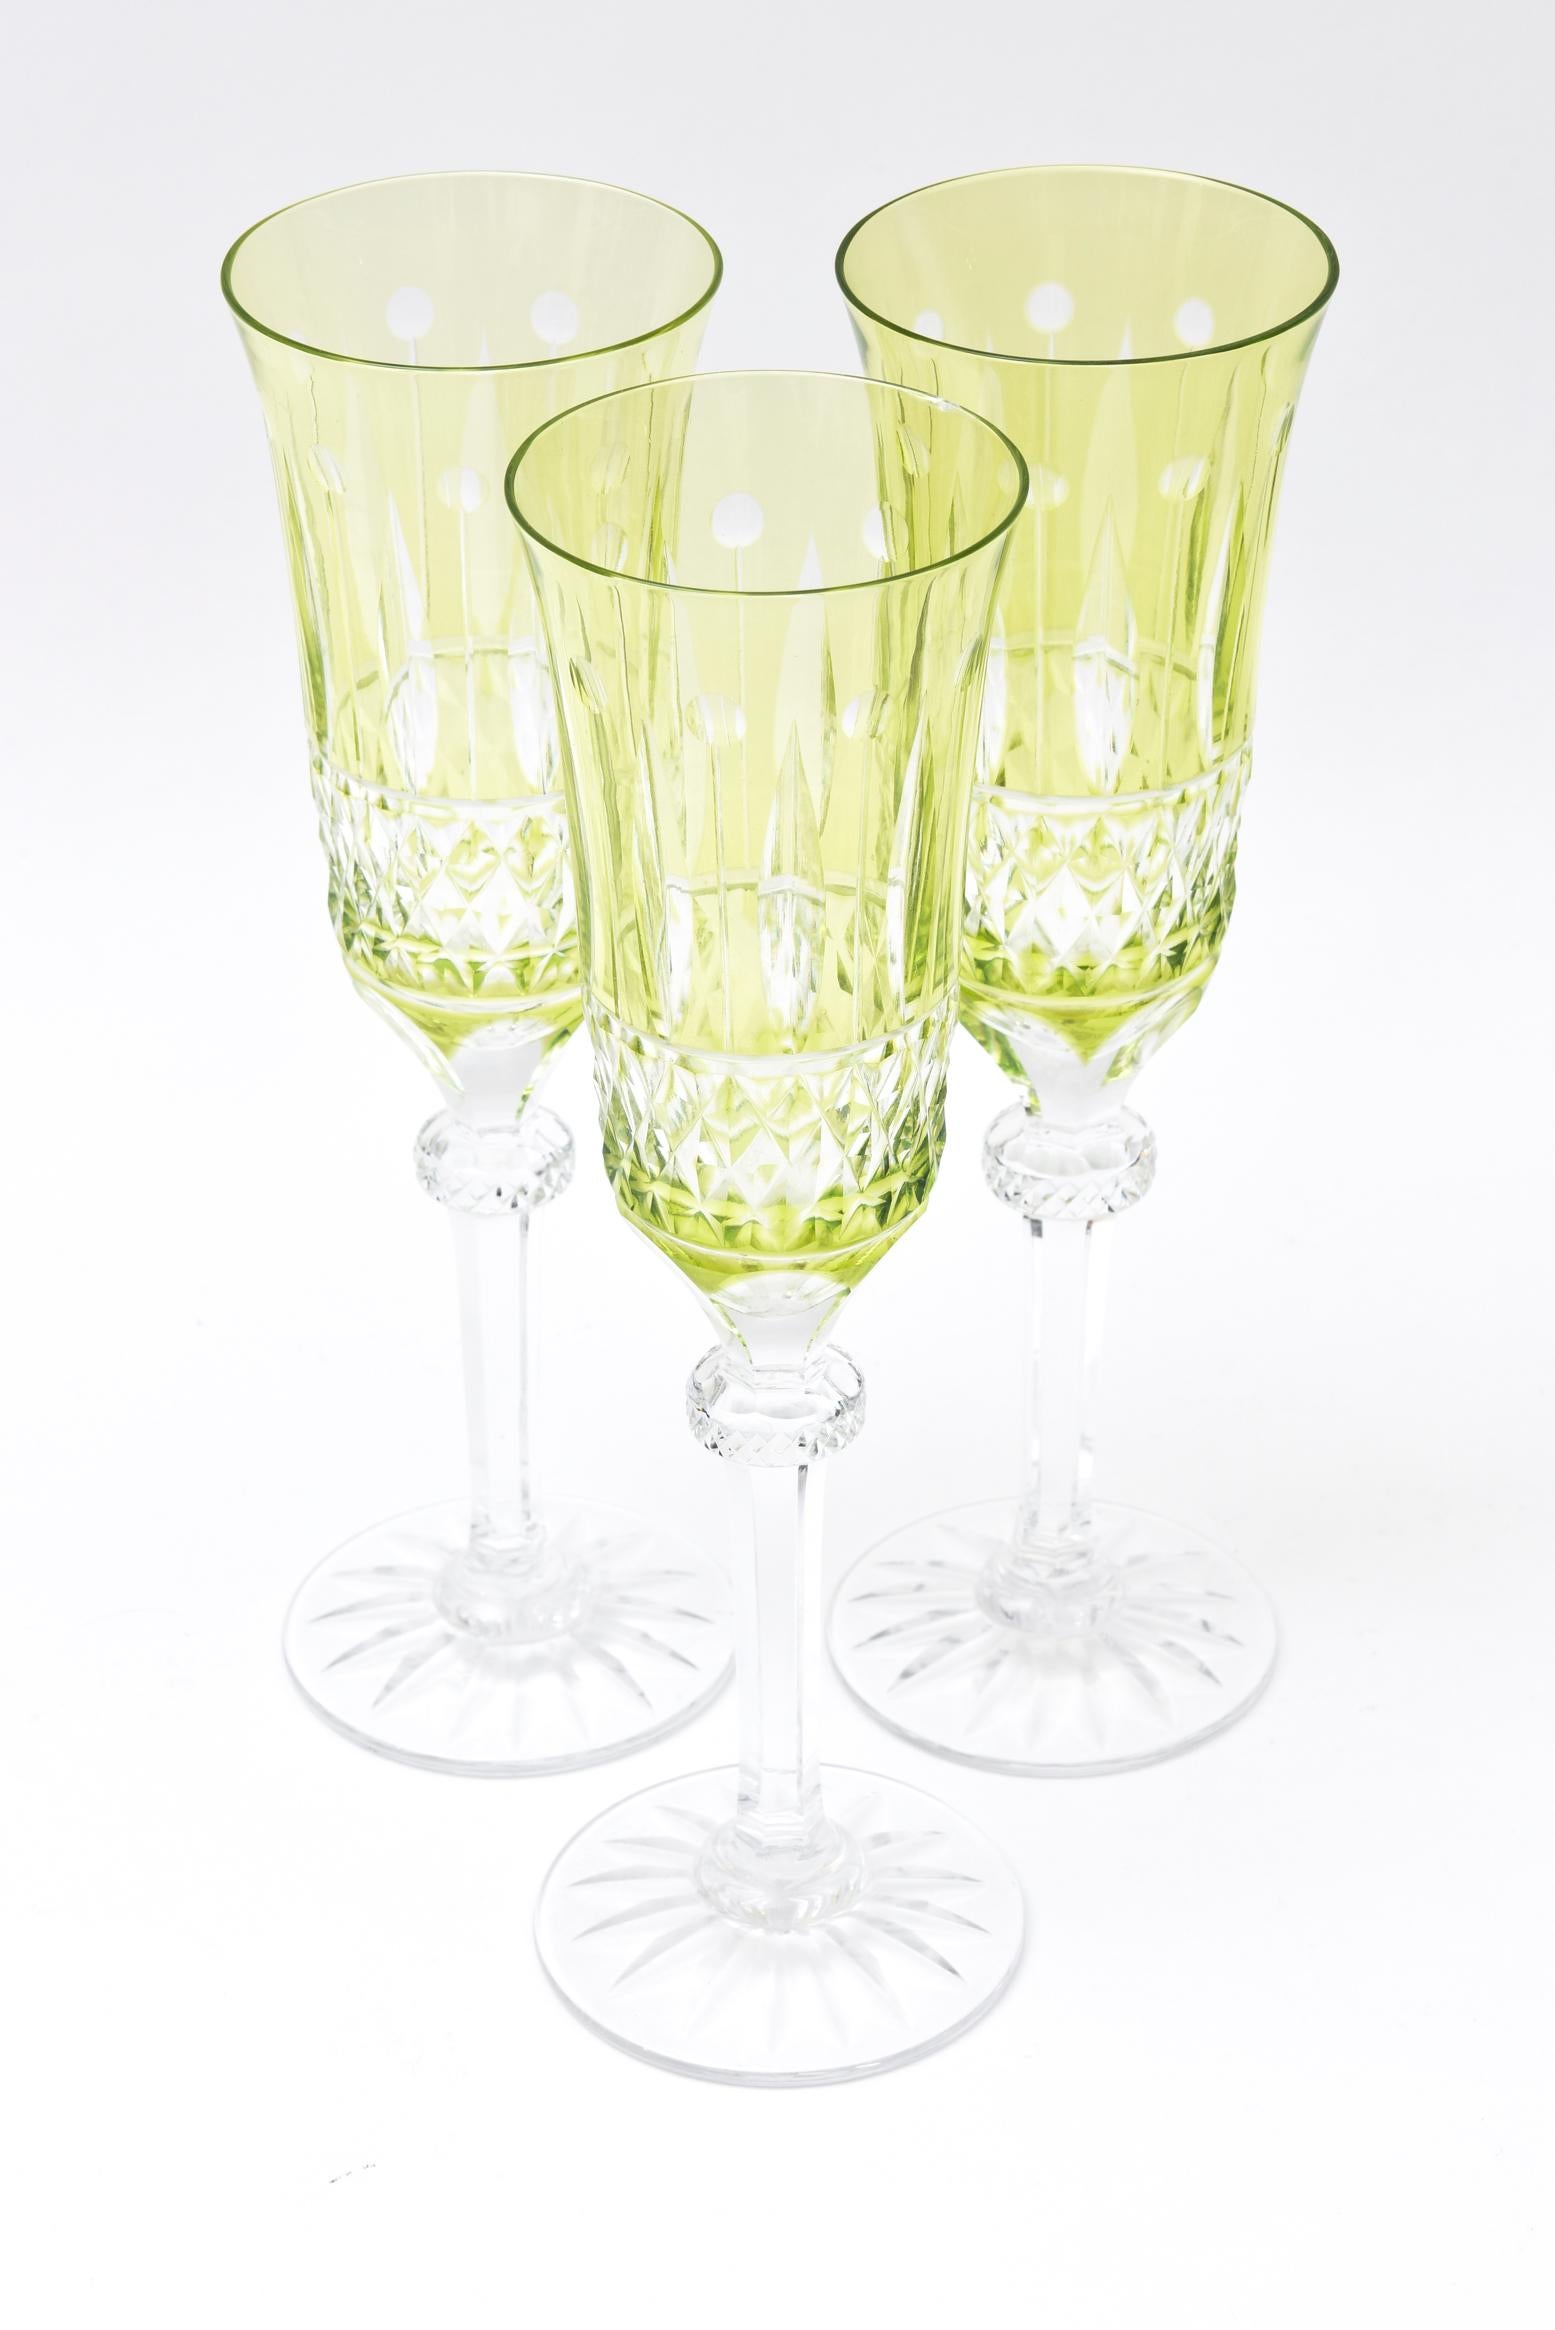 Mid-20th Century 11 Champagne Flutes, Cut Crystal Vintage, Great Chartreuse Color